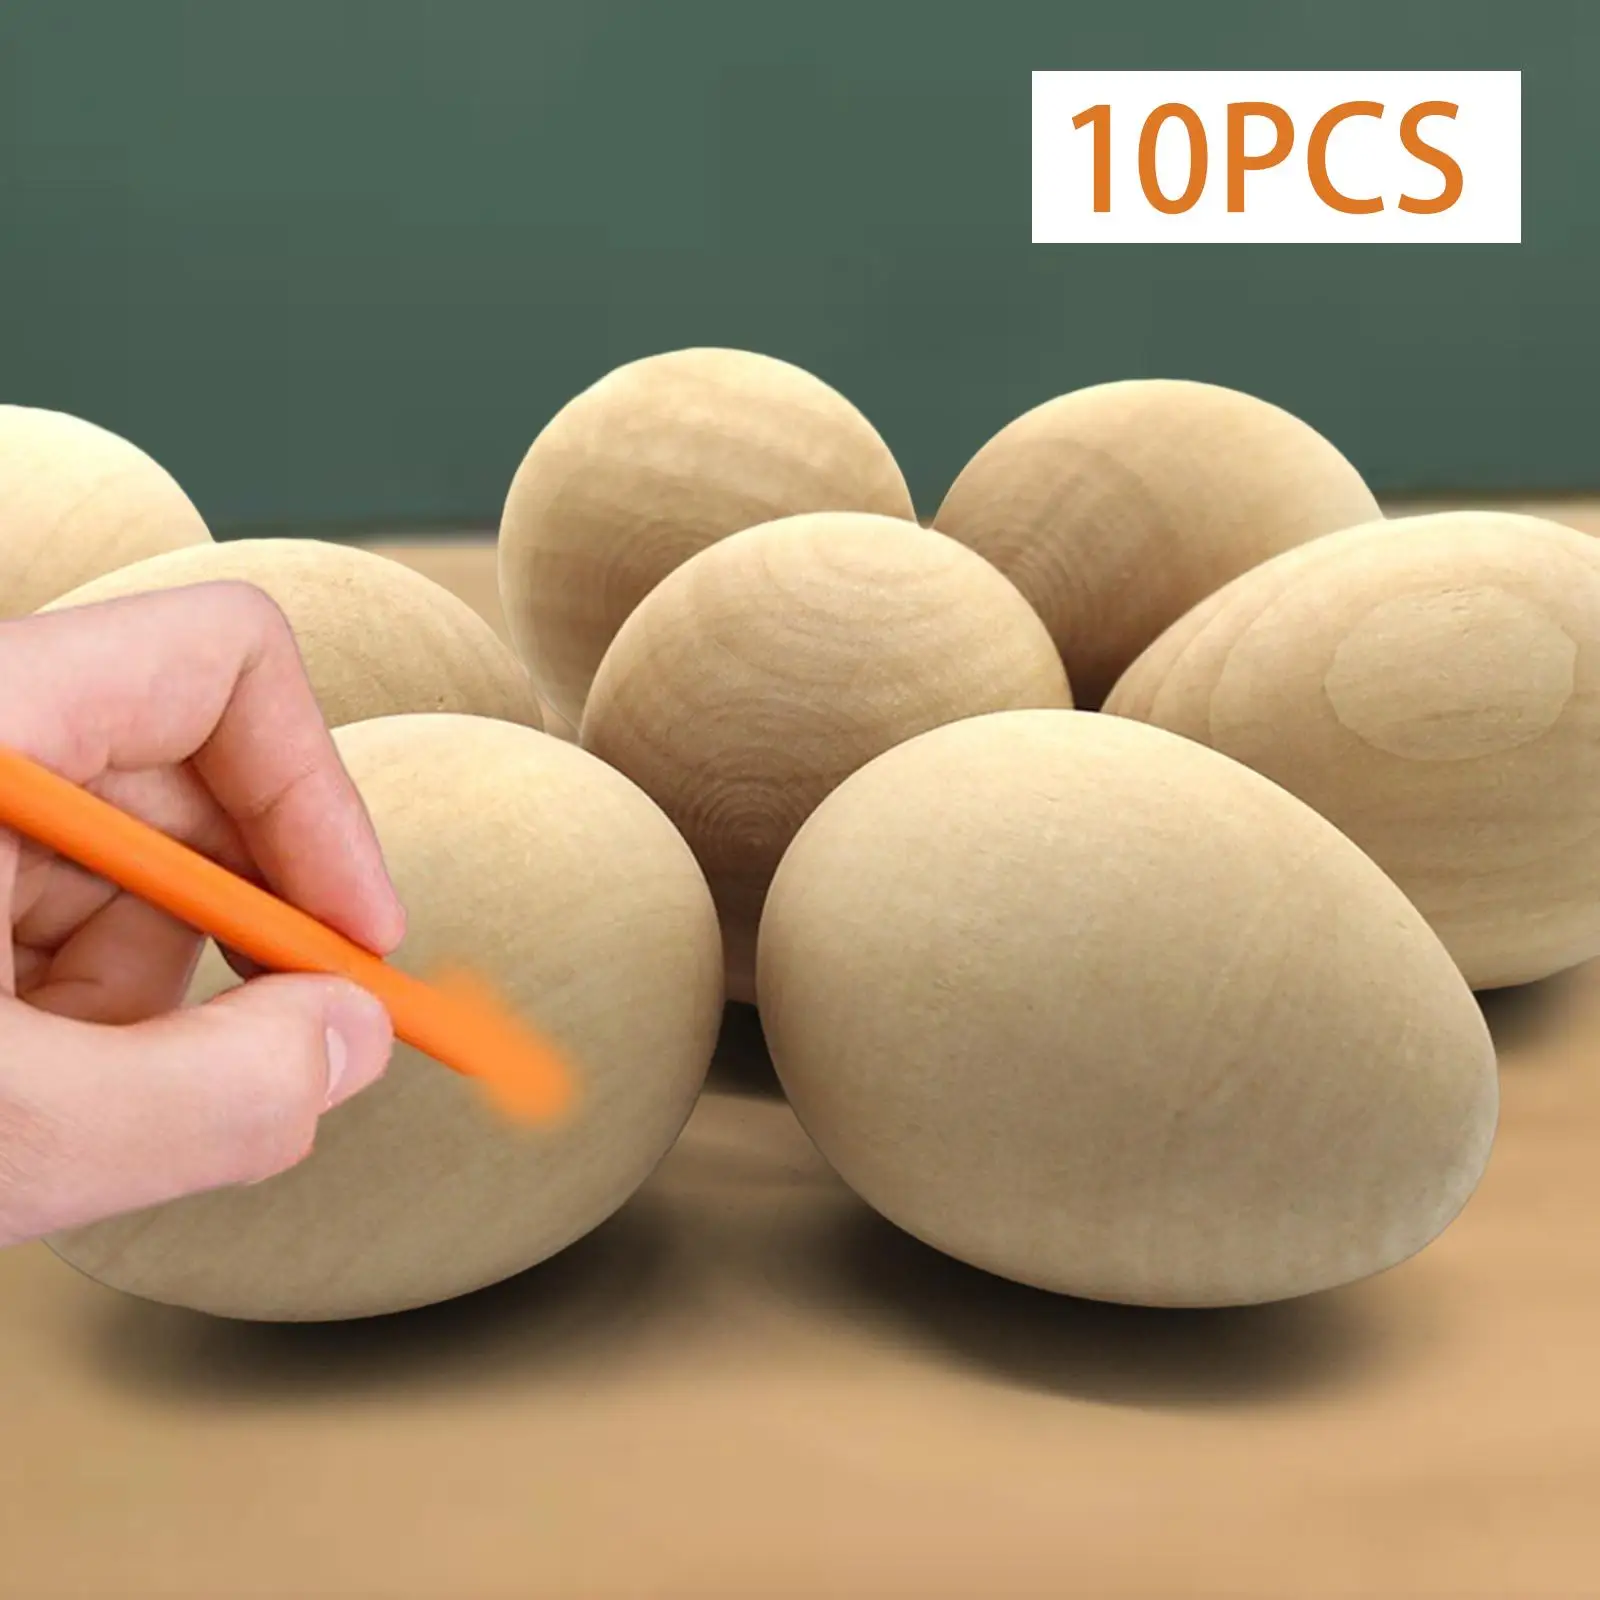 10Pcs Wooden Blank Eggs Painted Exercise Manual Graffiti Unfinished Wood Eggs with Flat Bottom for DIY Crafts Basket Fillers